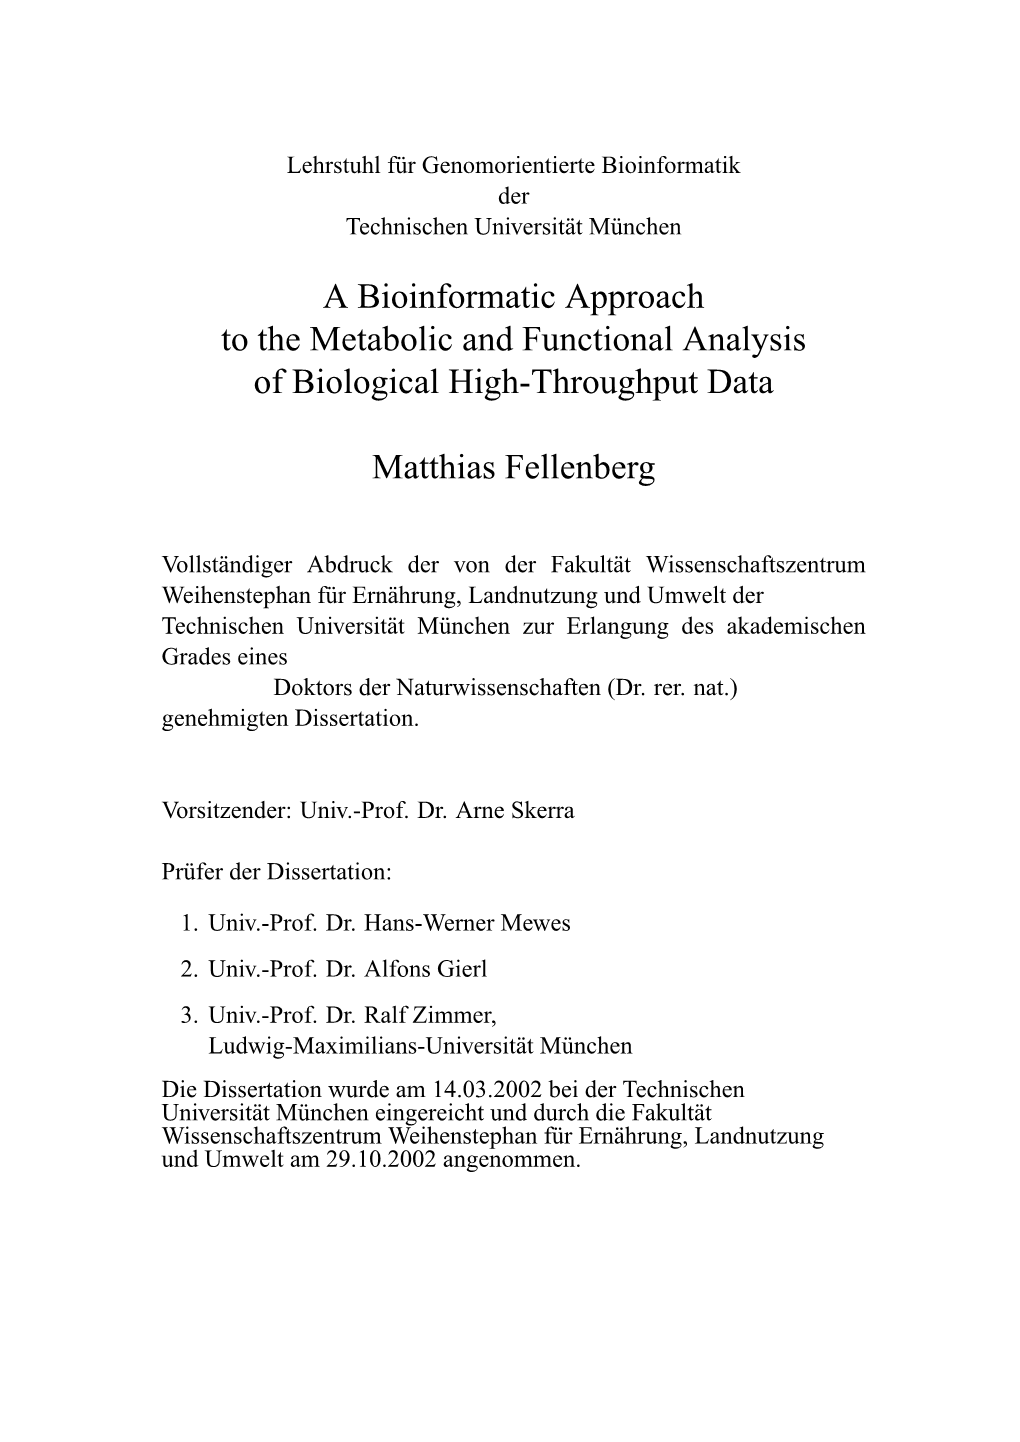 A Bioinformatic Approach to the Metabolic and Functional Analysis of Biological High-Throughput Data